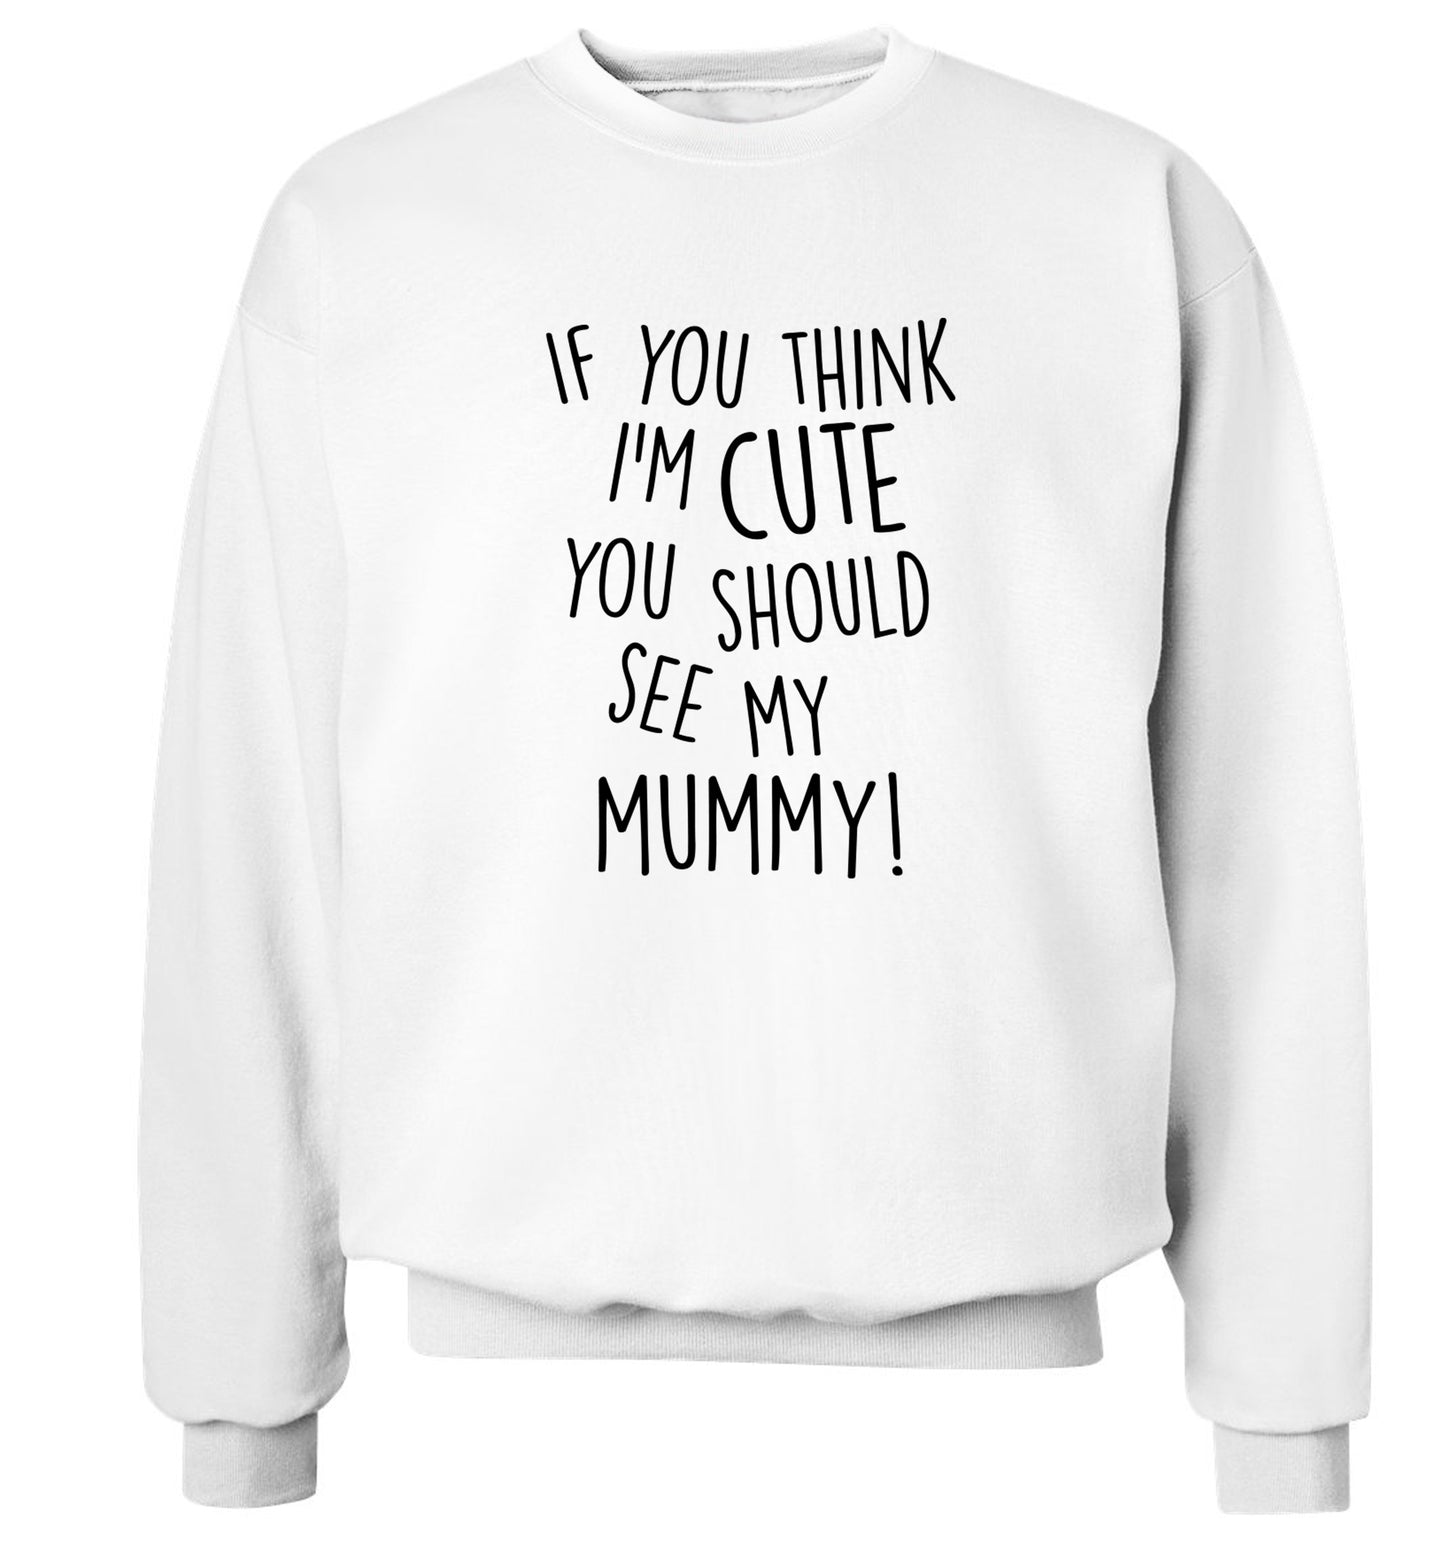 If you think I'm cute you should see my mummy Adult's unisex white Sweater 2XL